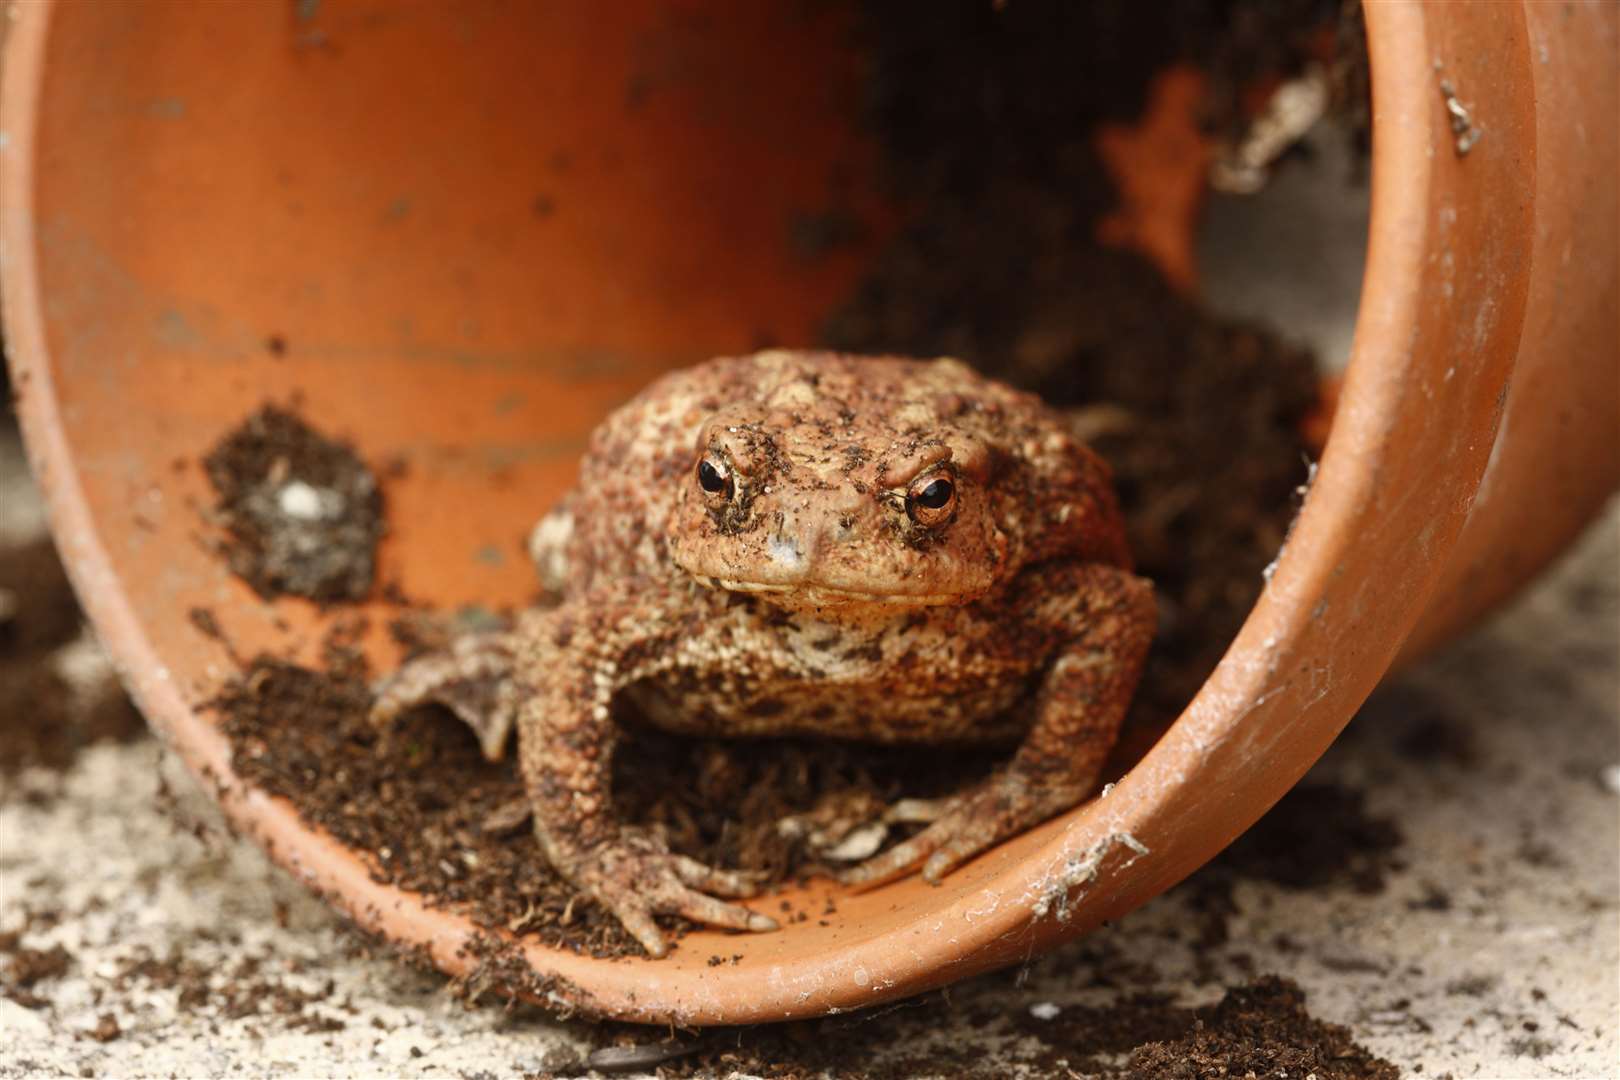 Turn your garden into a frog and toad abode in winter.